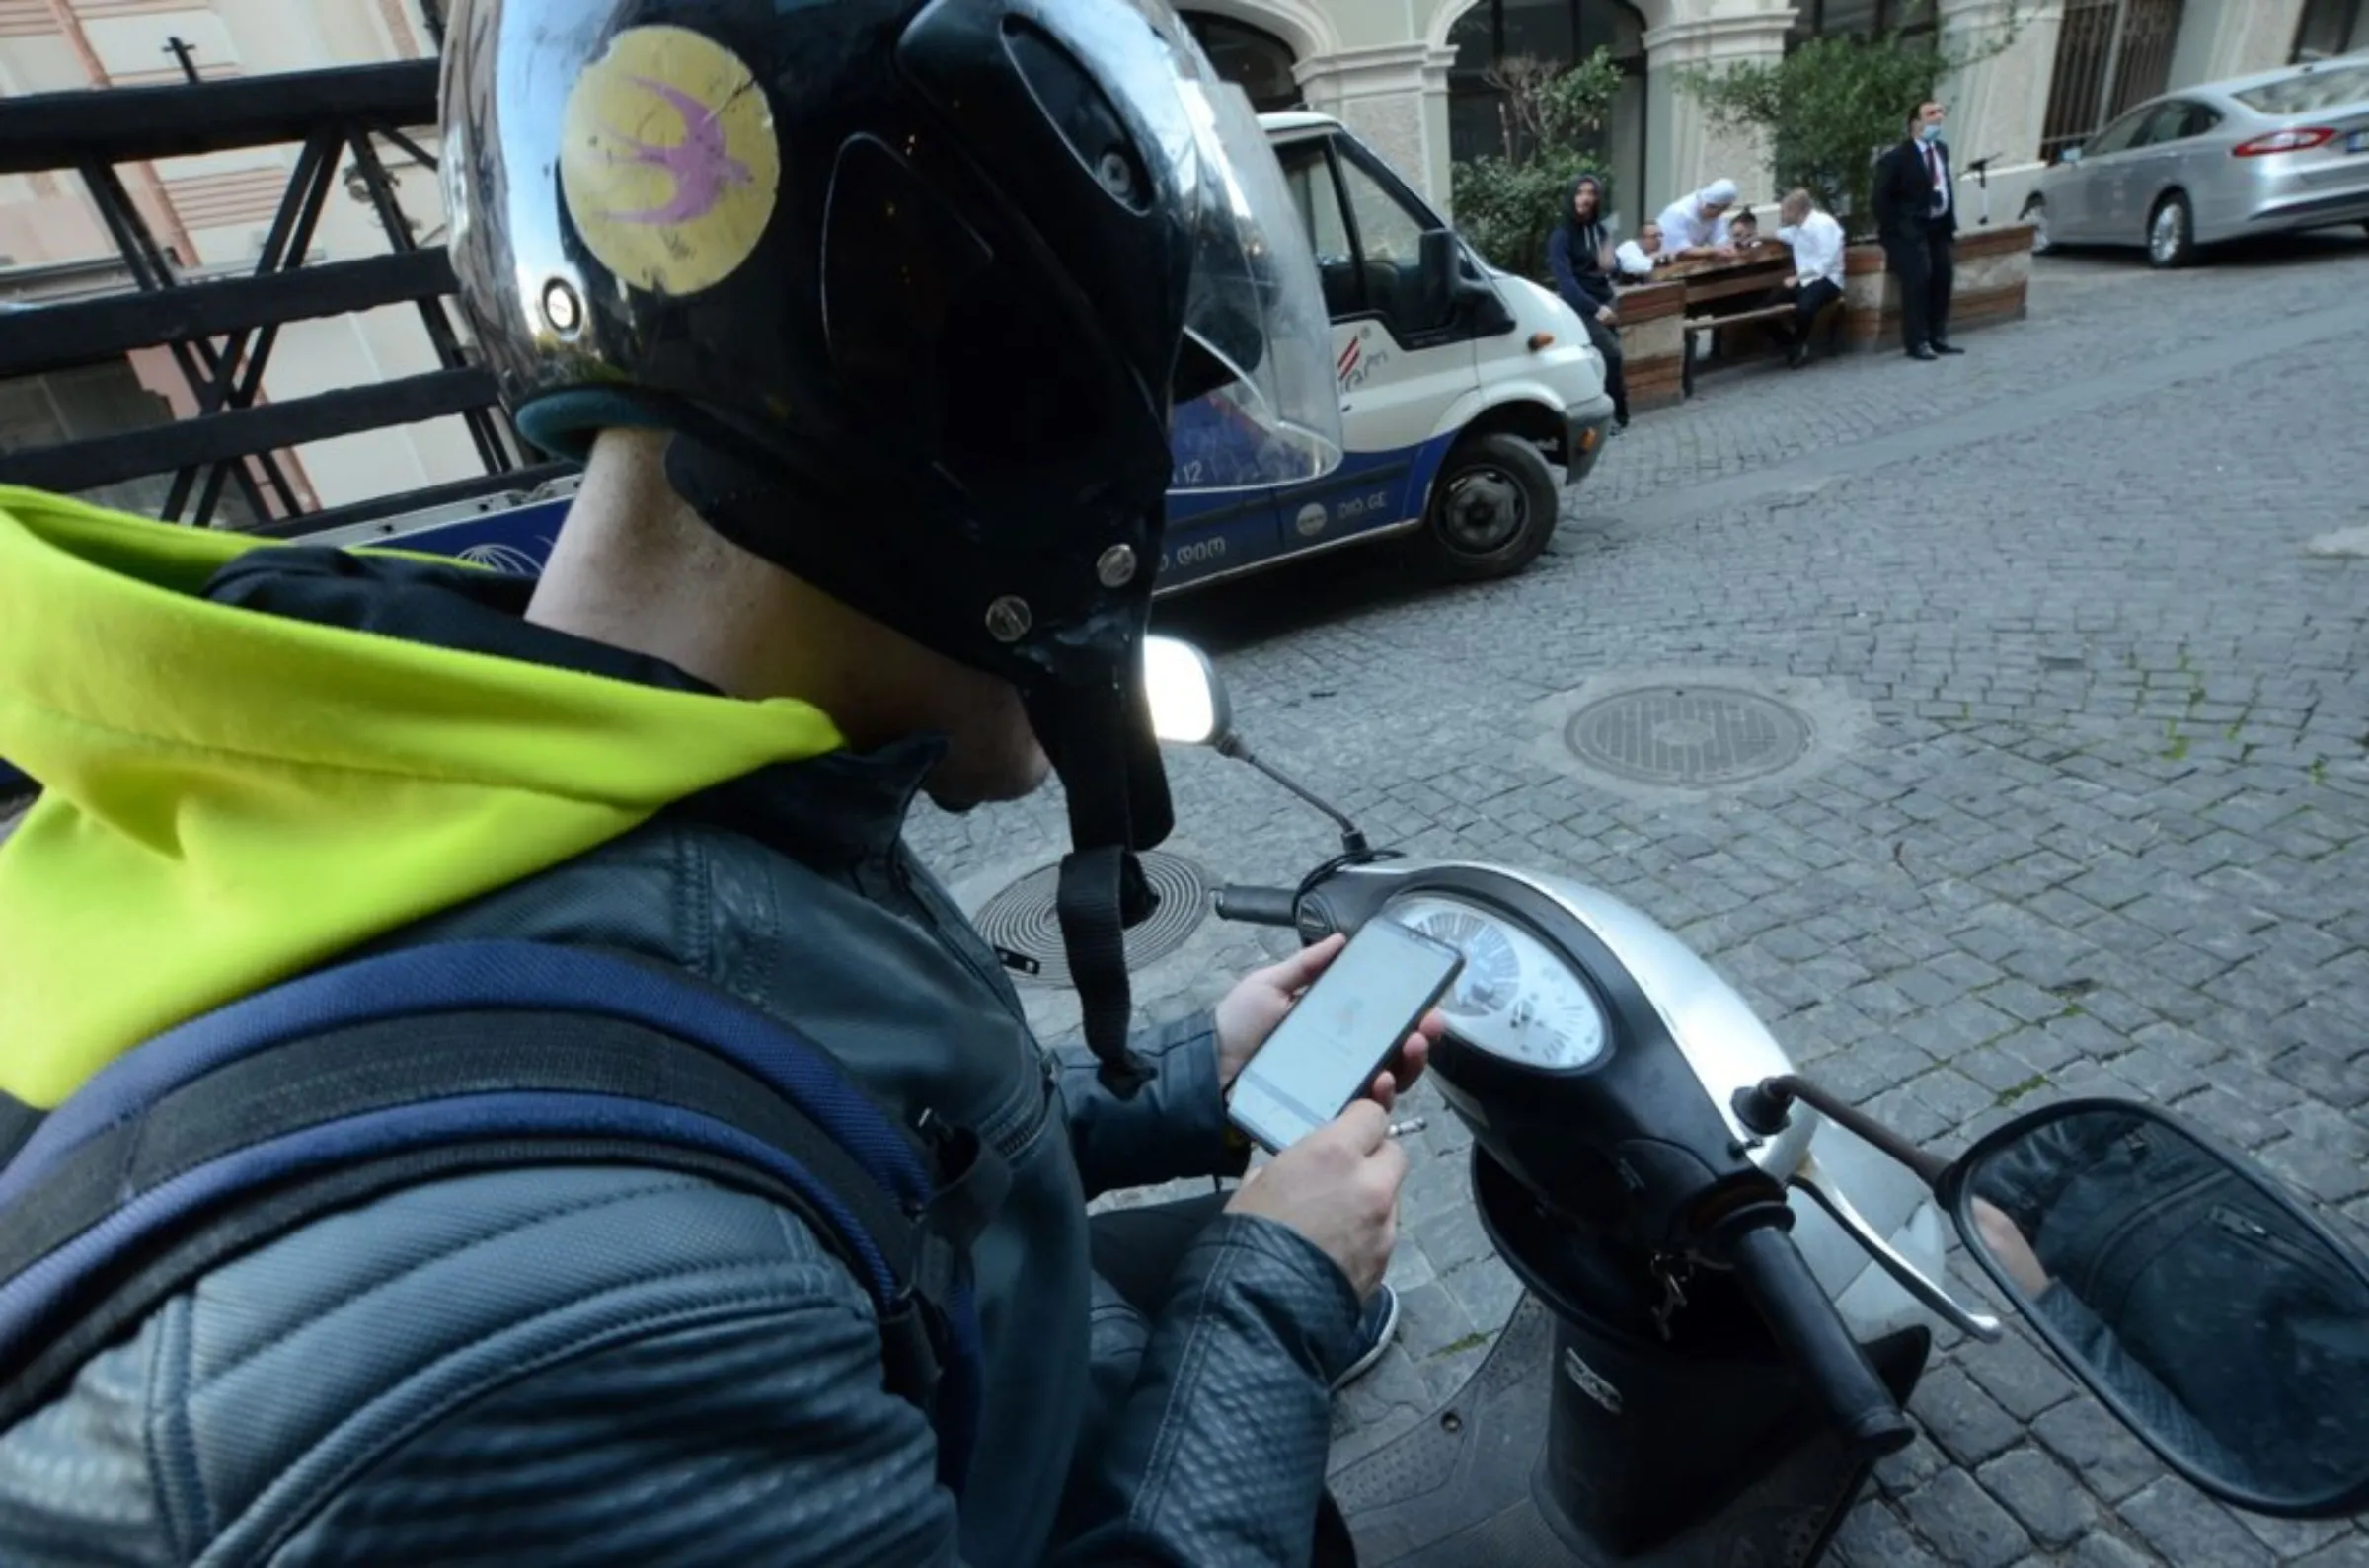 Georgian delivery driver Andro, 30, who works for Spanish company Glovo, sits on his moped in Tbilisi, Georgia. October 19, 2021